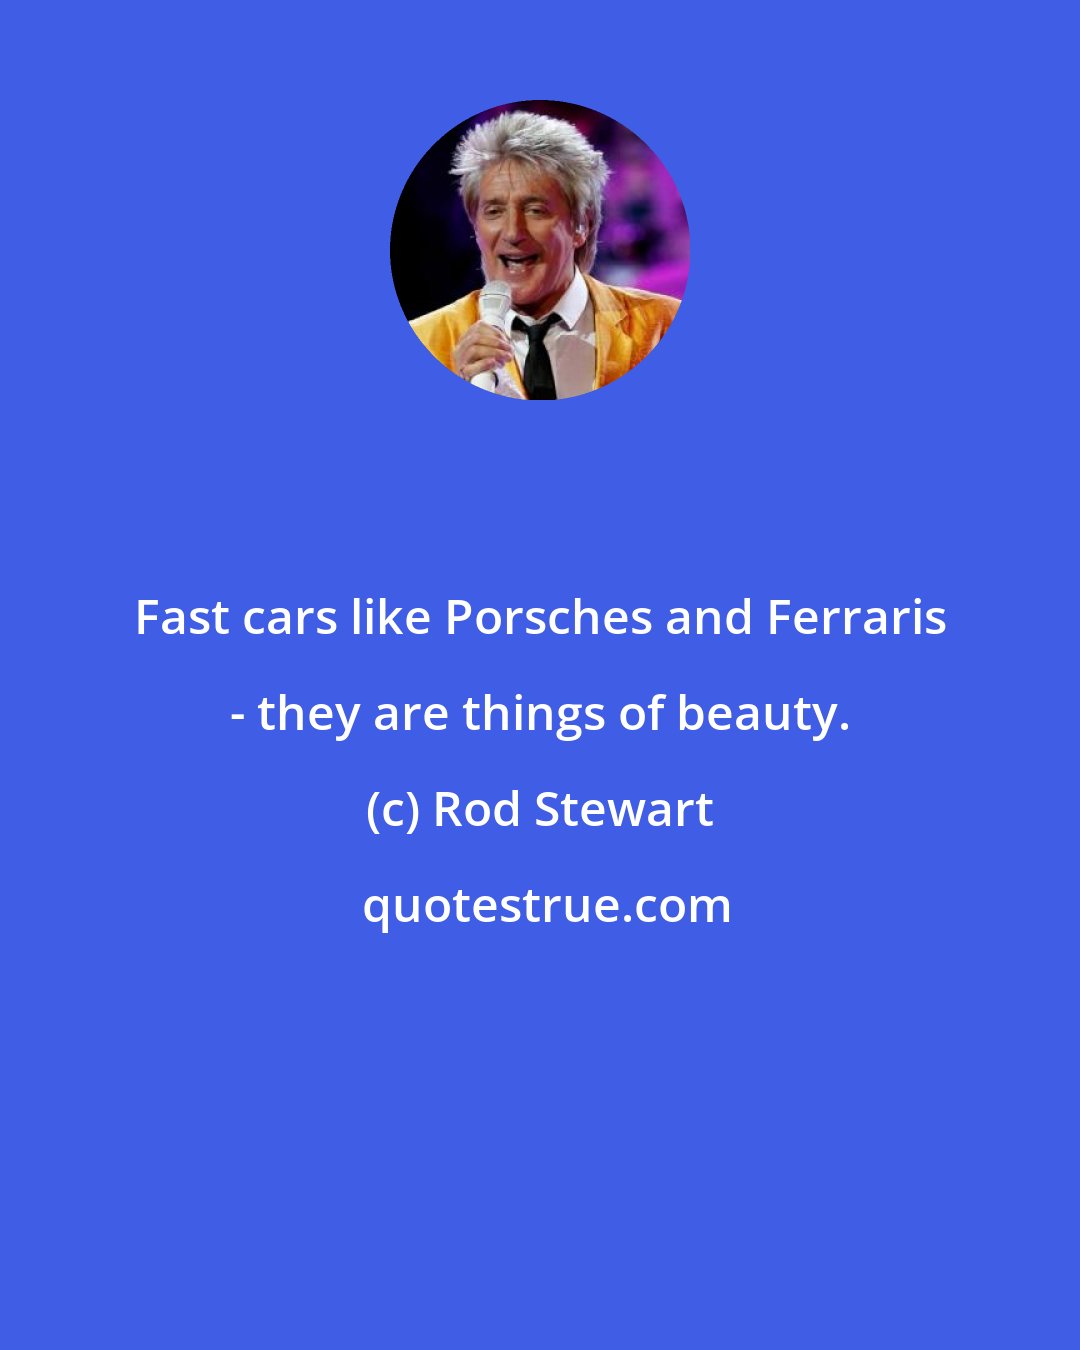 Rod Stewart: Fast cars like Porsches and Ferraris - they are things of beauty.